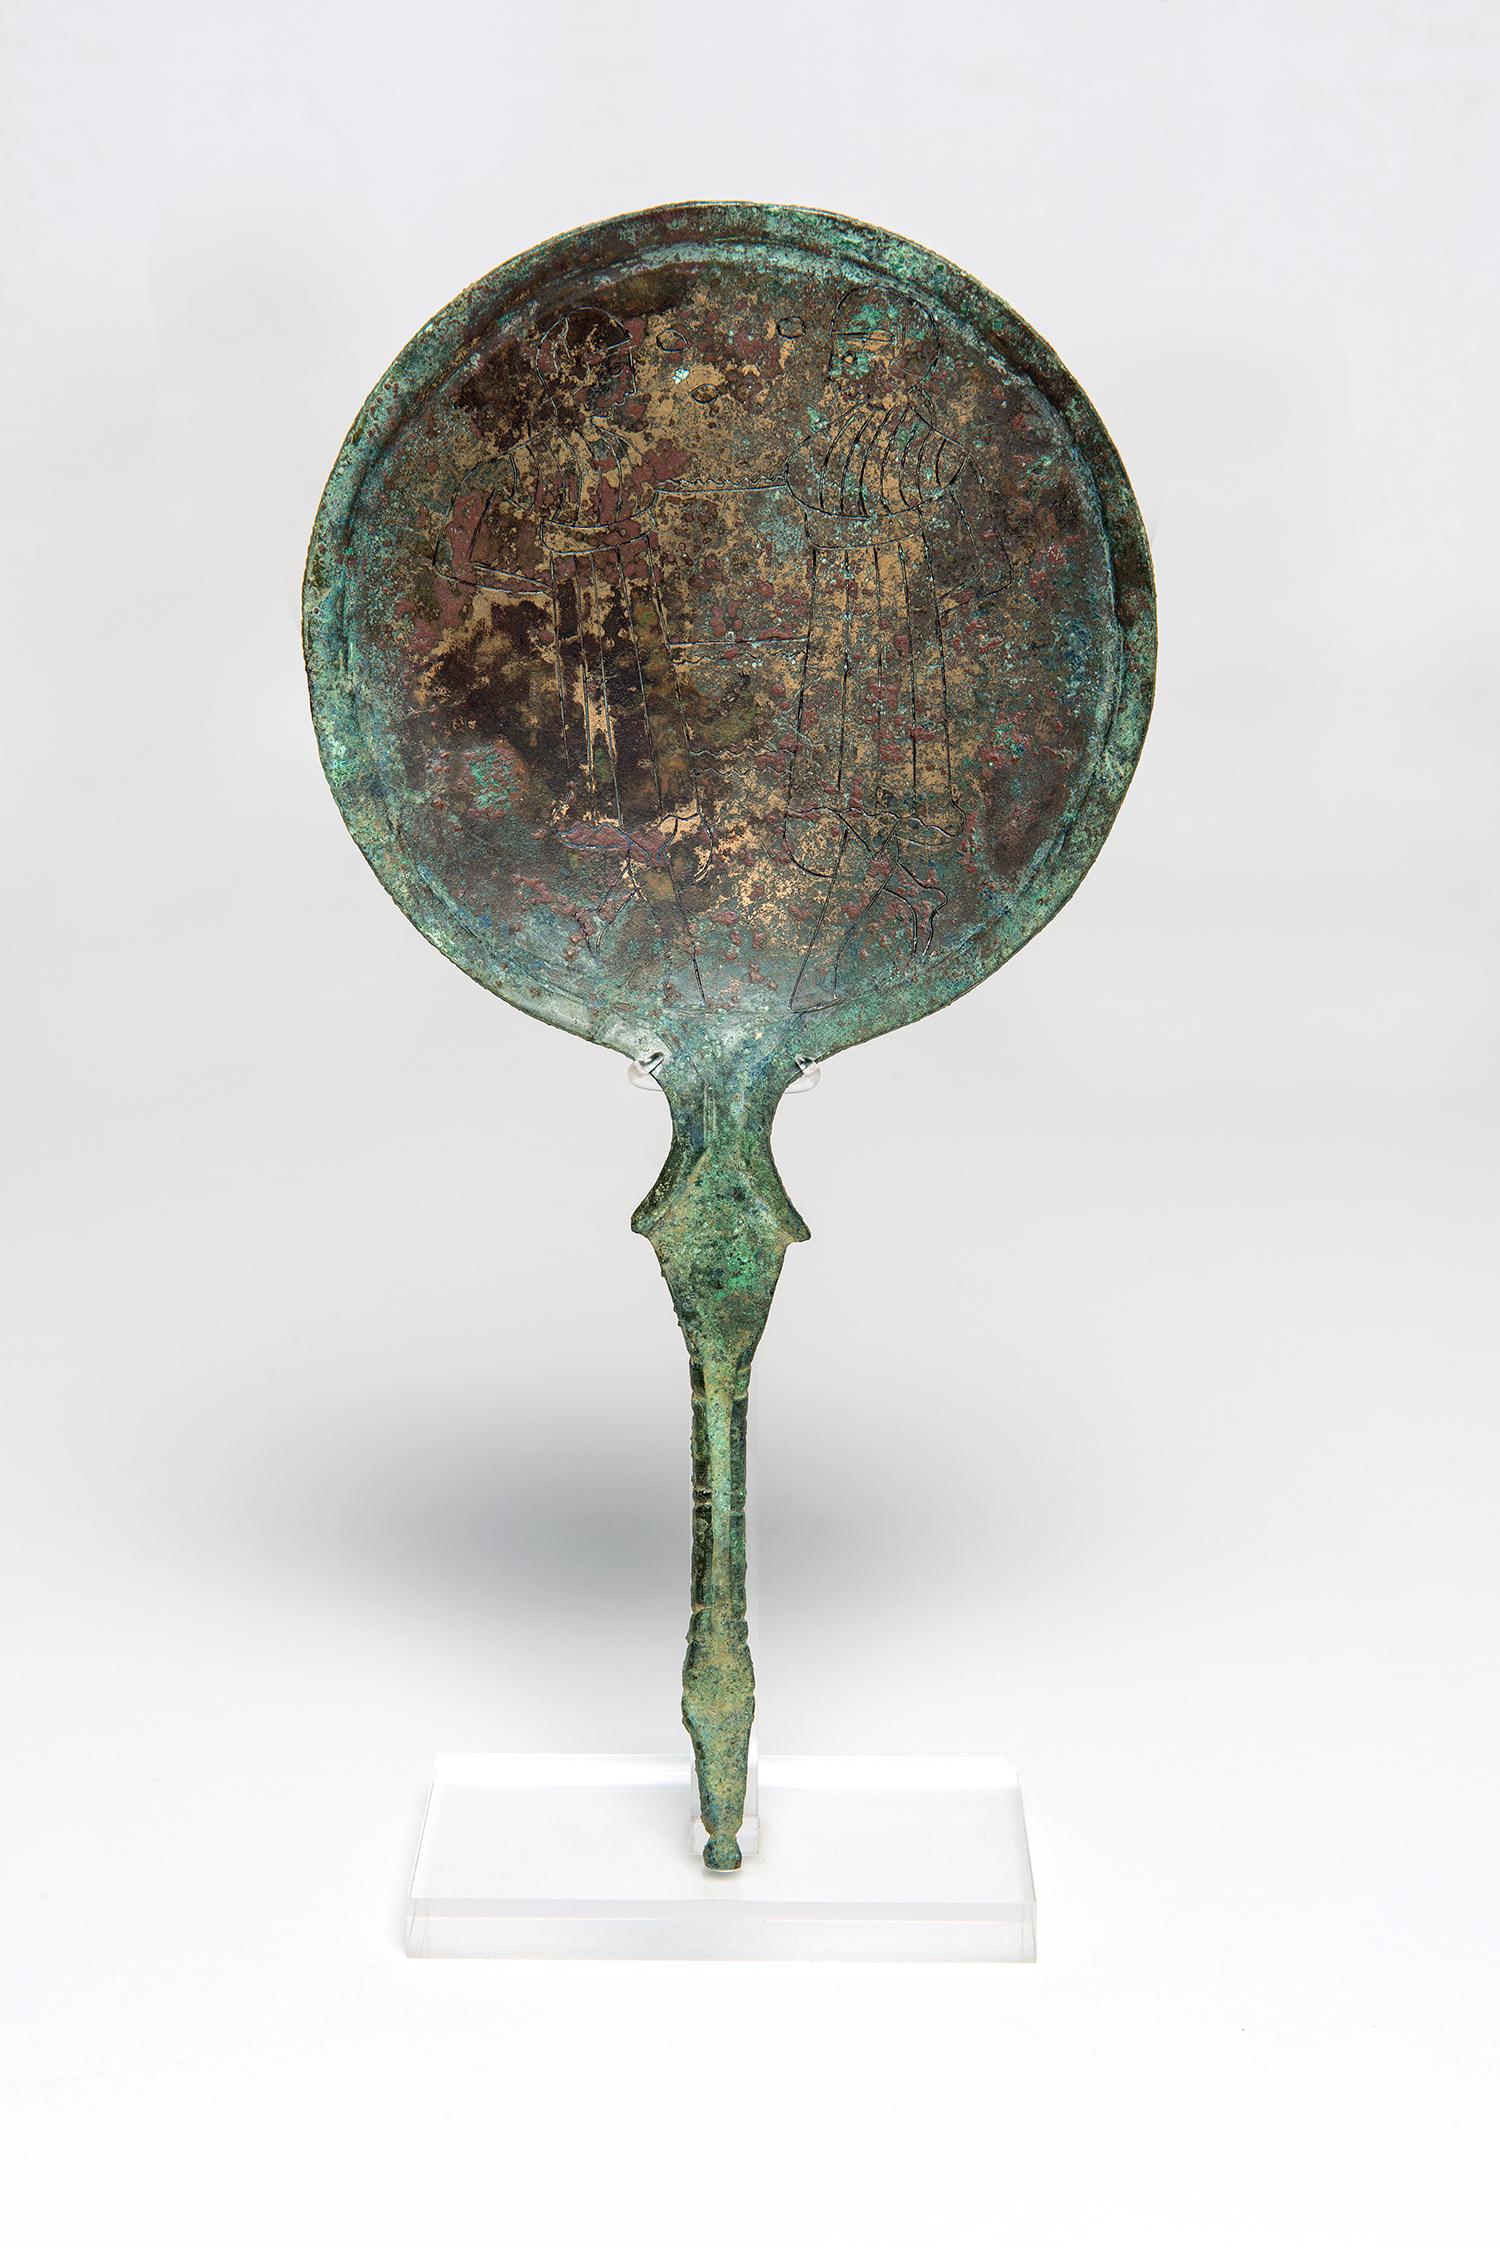 A wonderful Etruscan bronze mirror from the 2nd to 3rd century B.C., depicting two gods.
Obverse: Blue-green patina, bronze revealed in places. 
Reverse: blue-green patina. 
In the tondo two Dioskouroi wearing Phrygian caps stand alone facing each